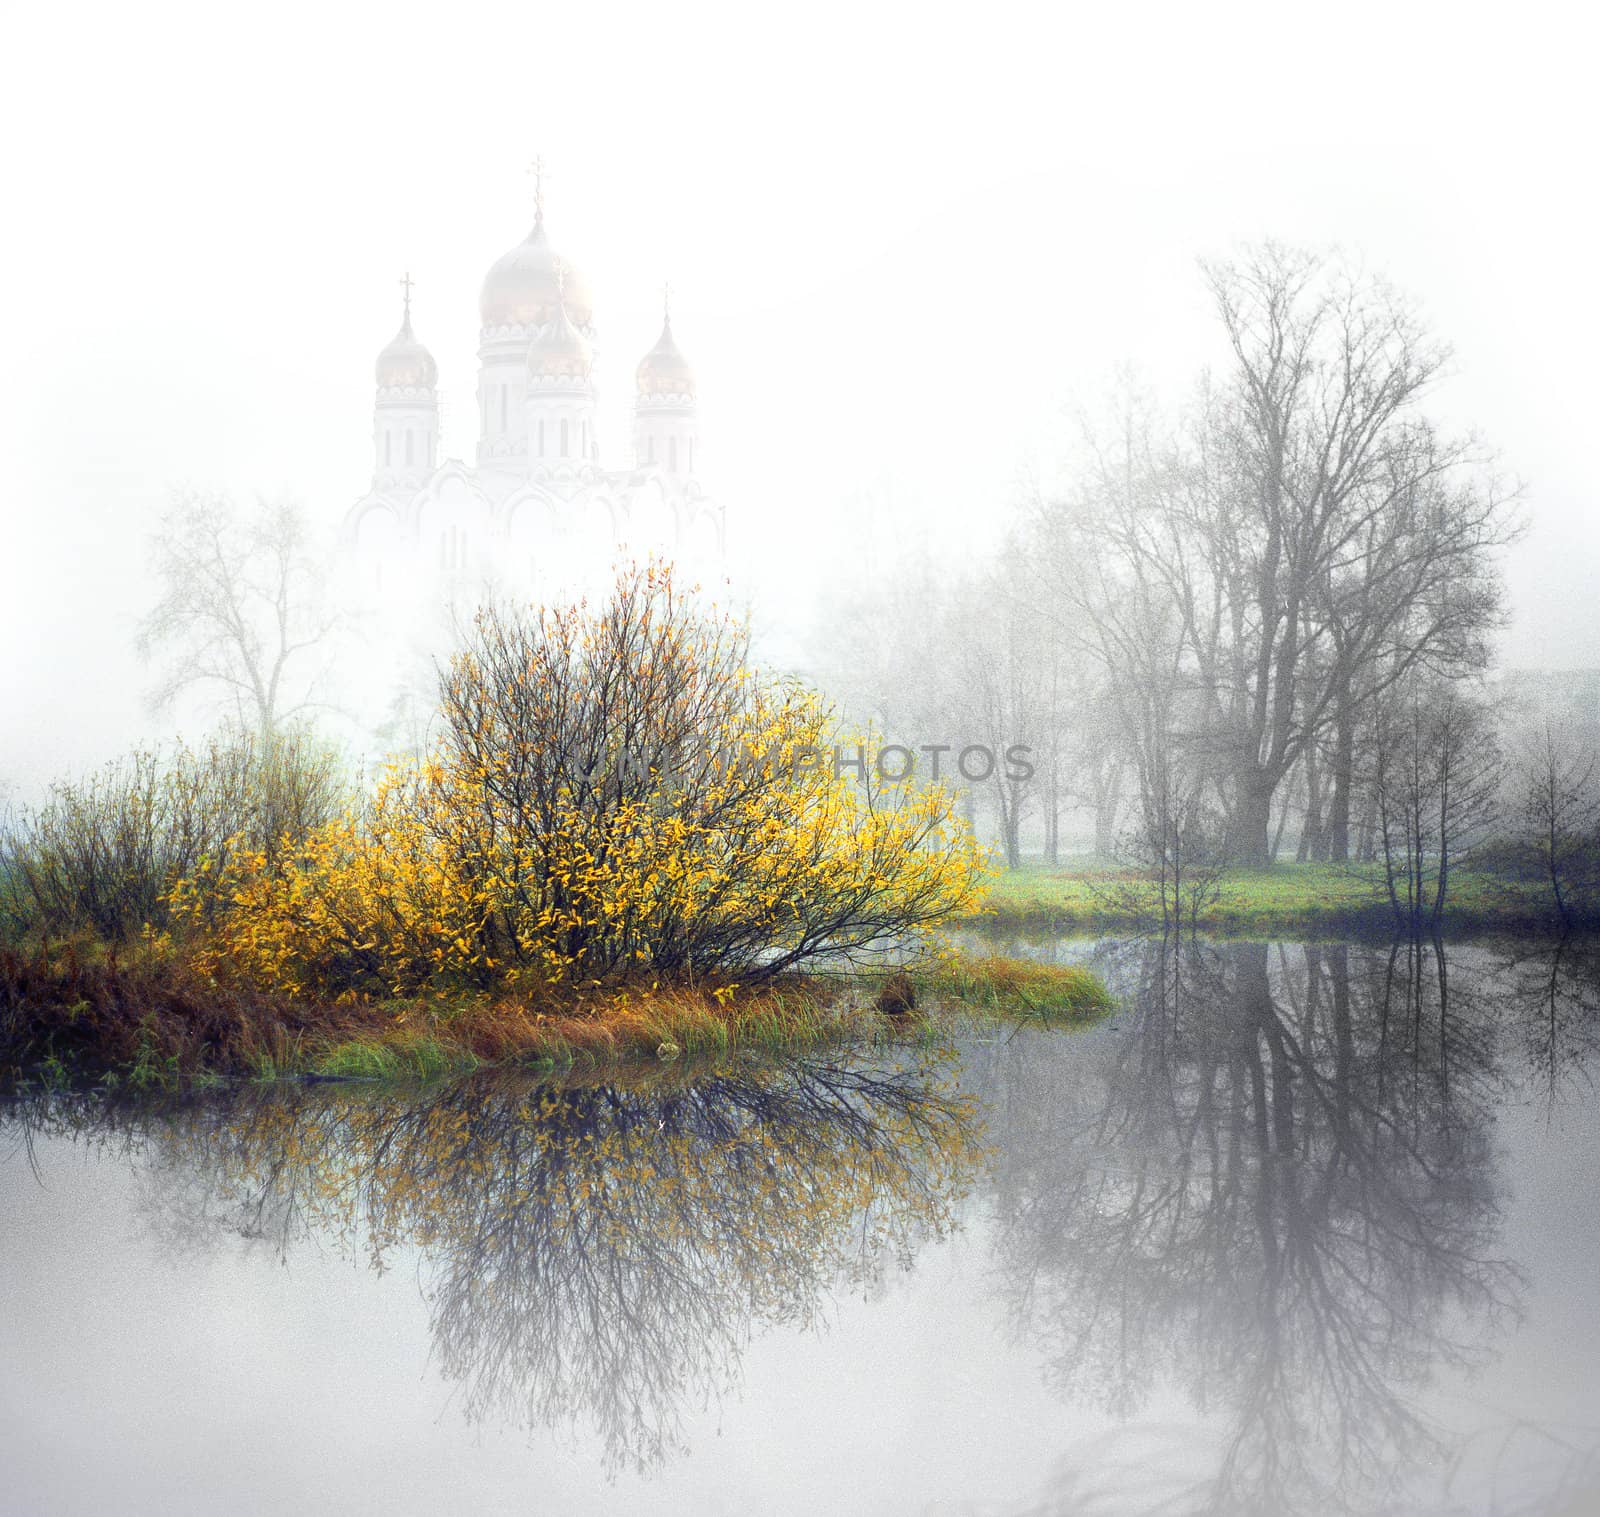 Church in the fog on the river